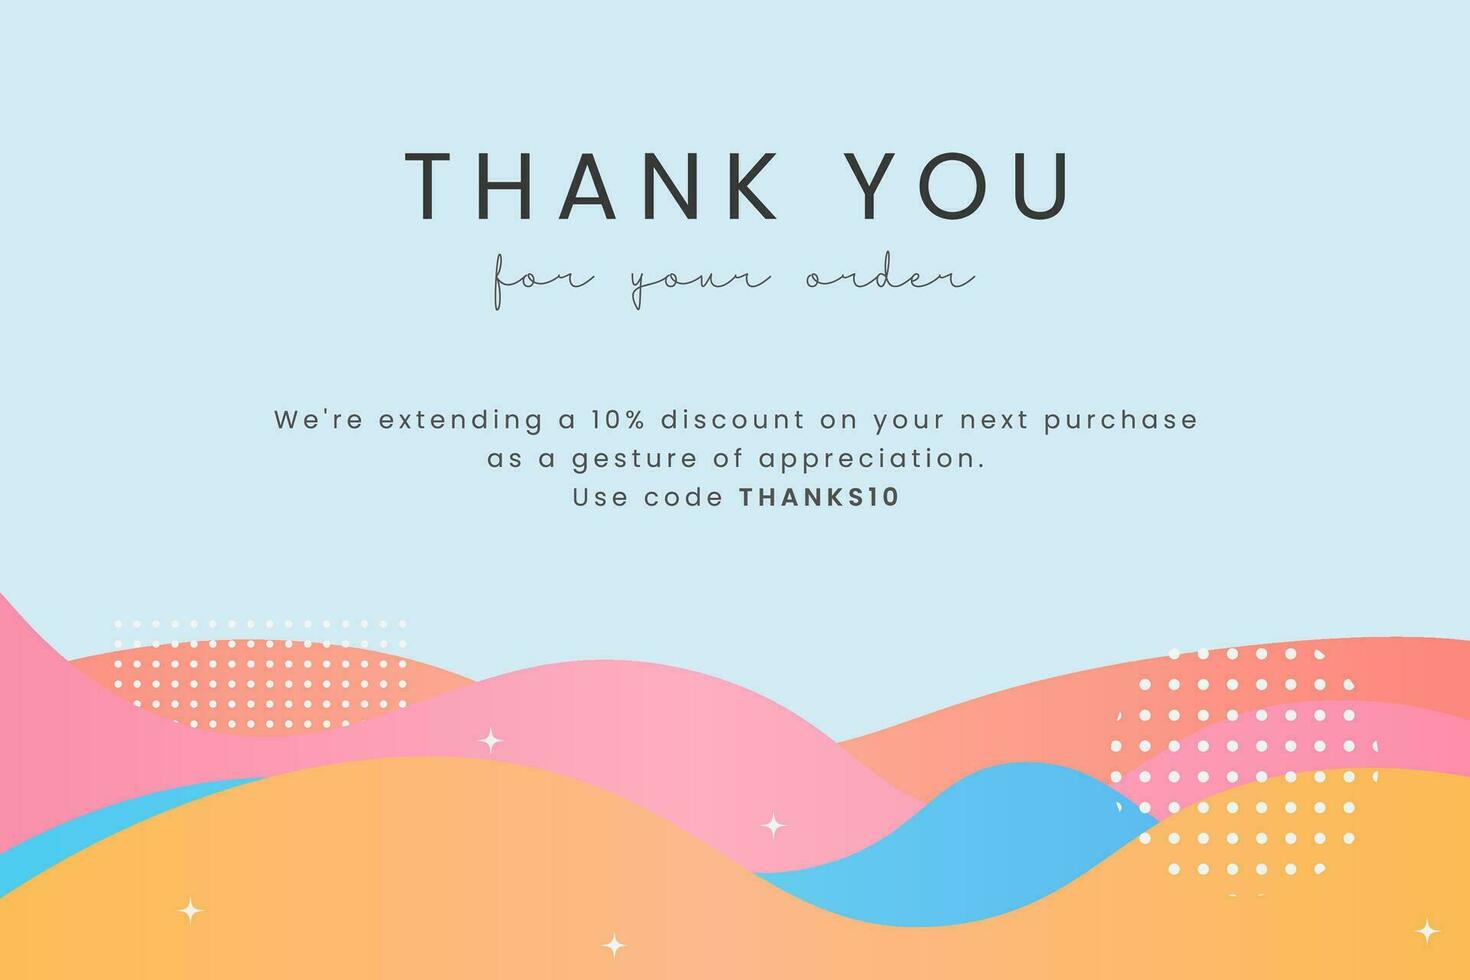 Thank you for your ORDER, printable vector illustration. Business thank you customer card, creative graphic design template. Soft watercolor background, calligraphy script text, business card.